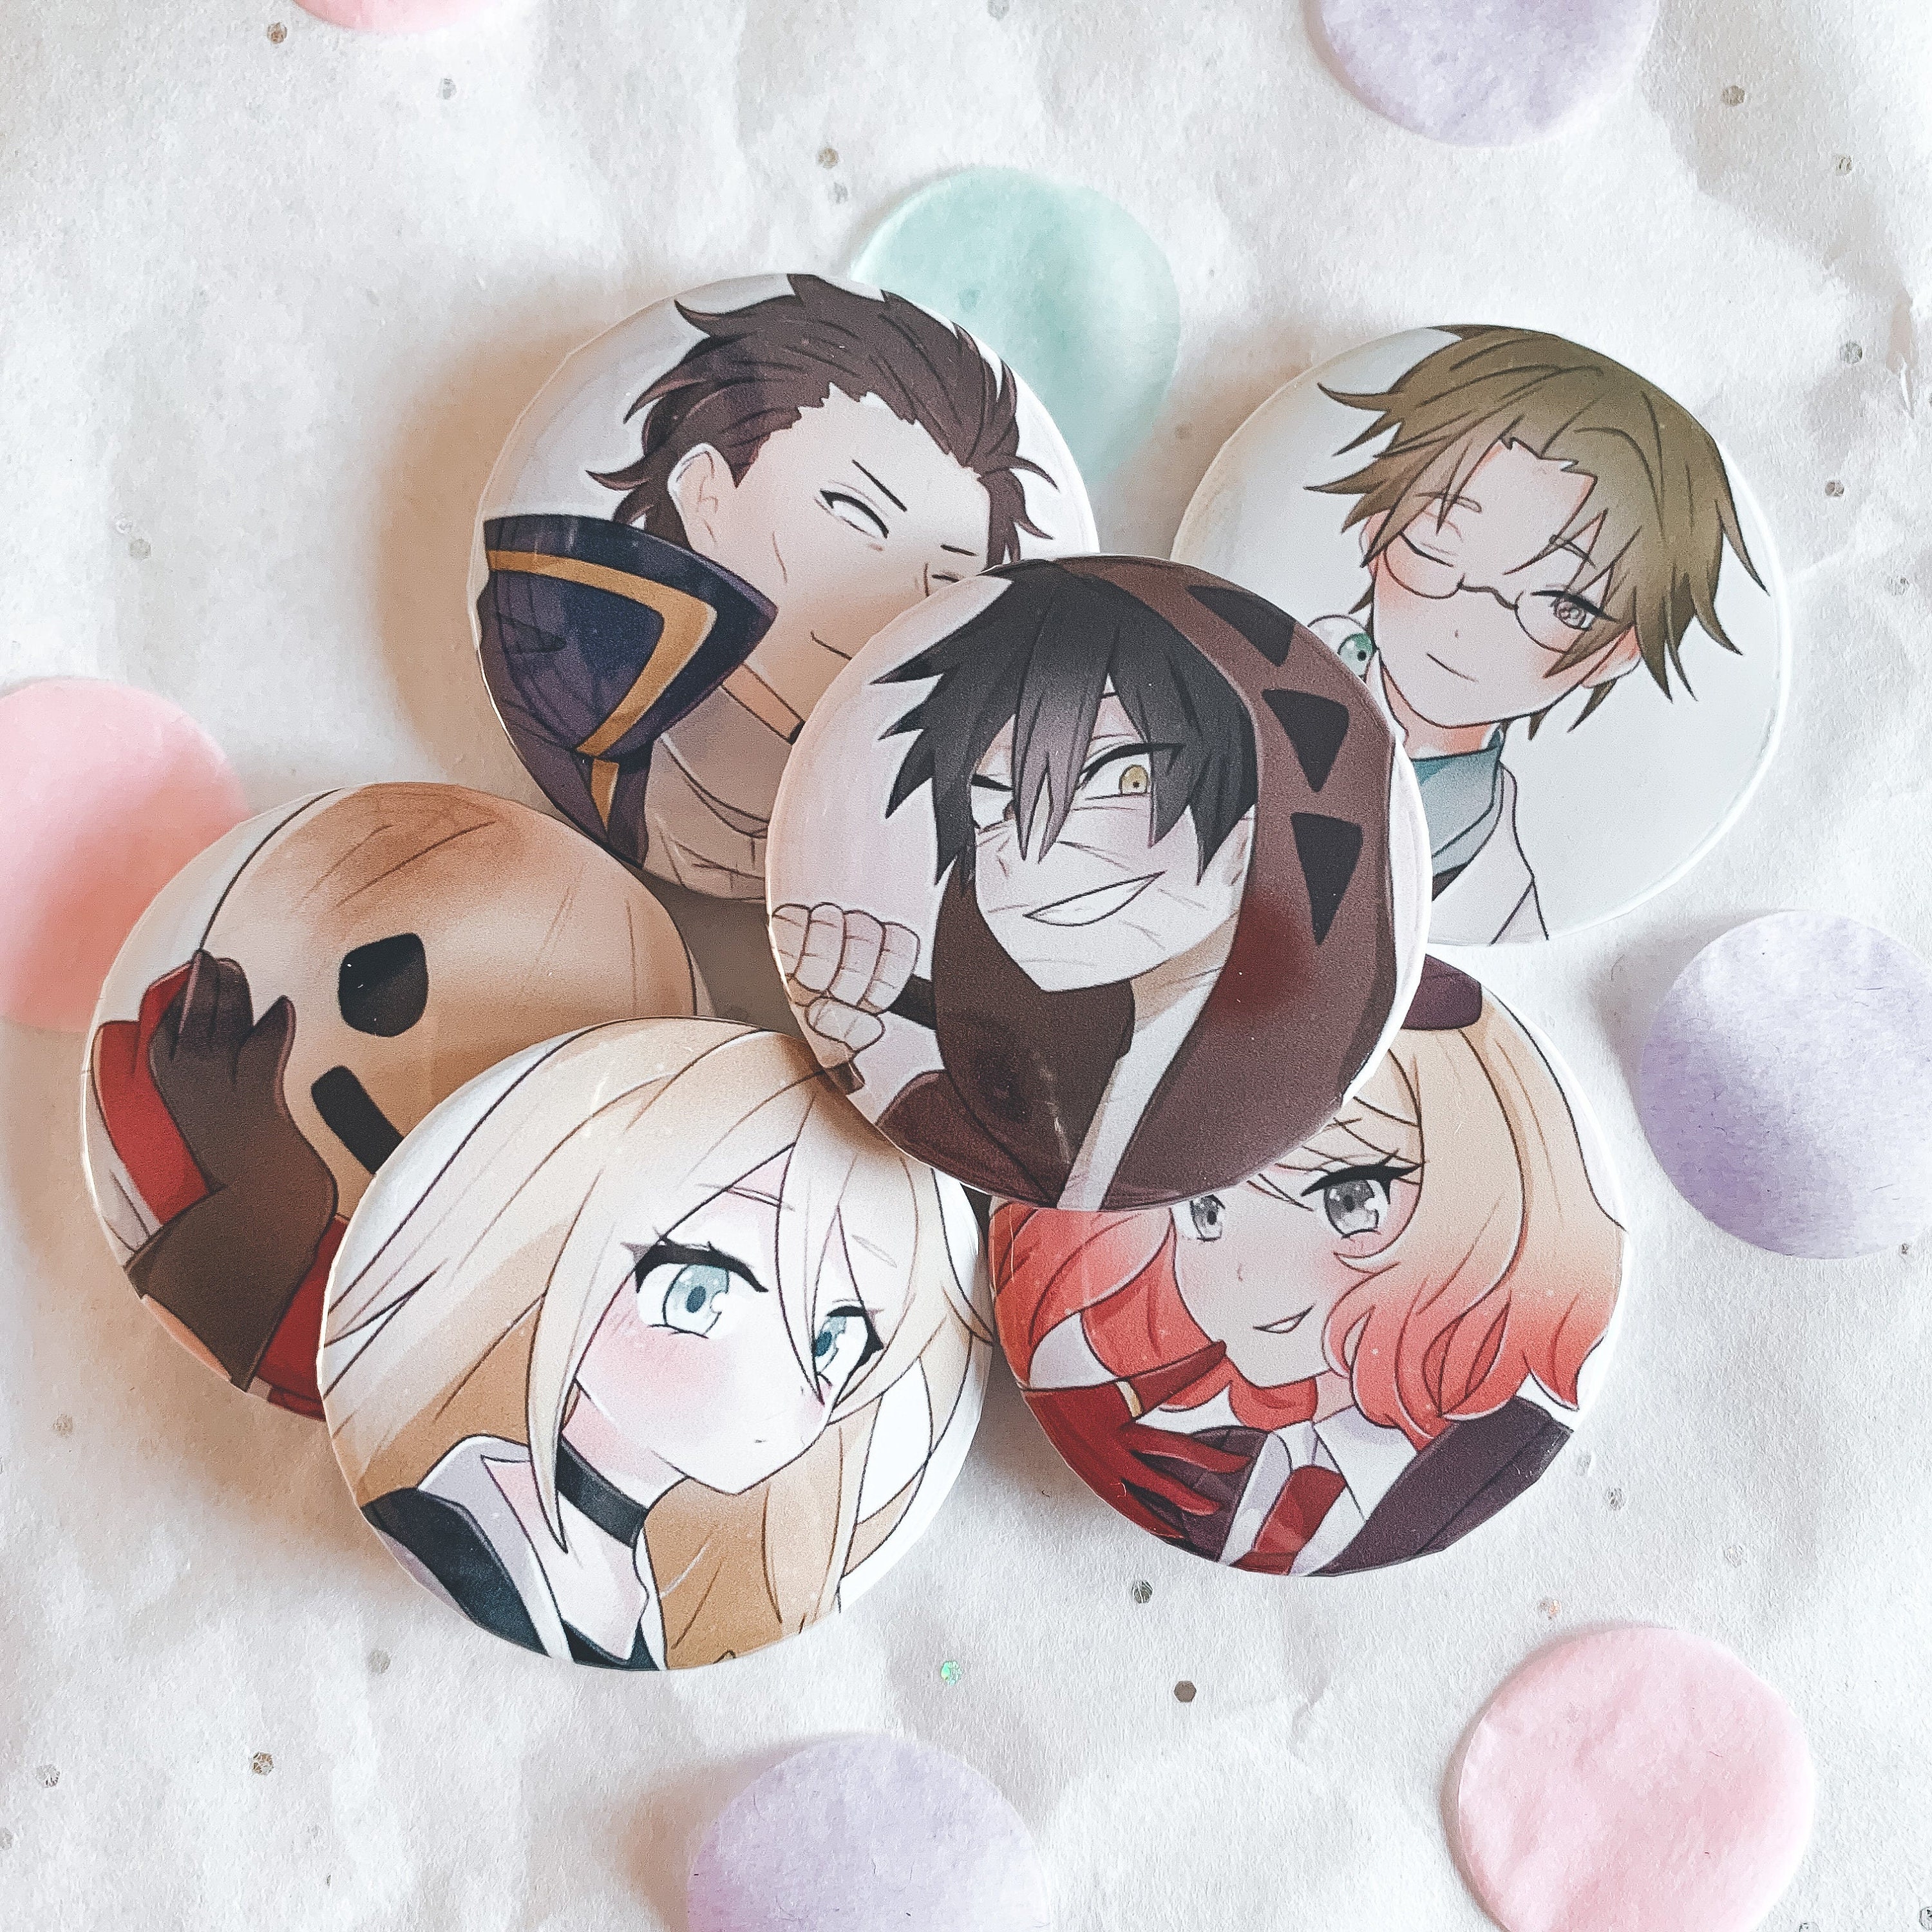 Angels Of Death Anime Gifts & Merchandise for Sale